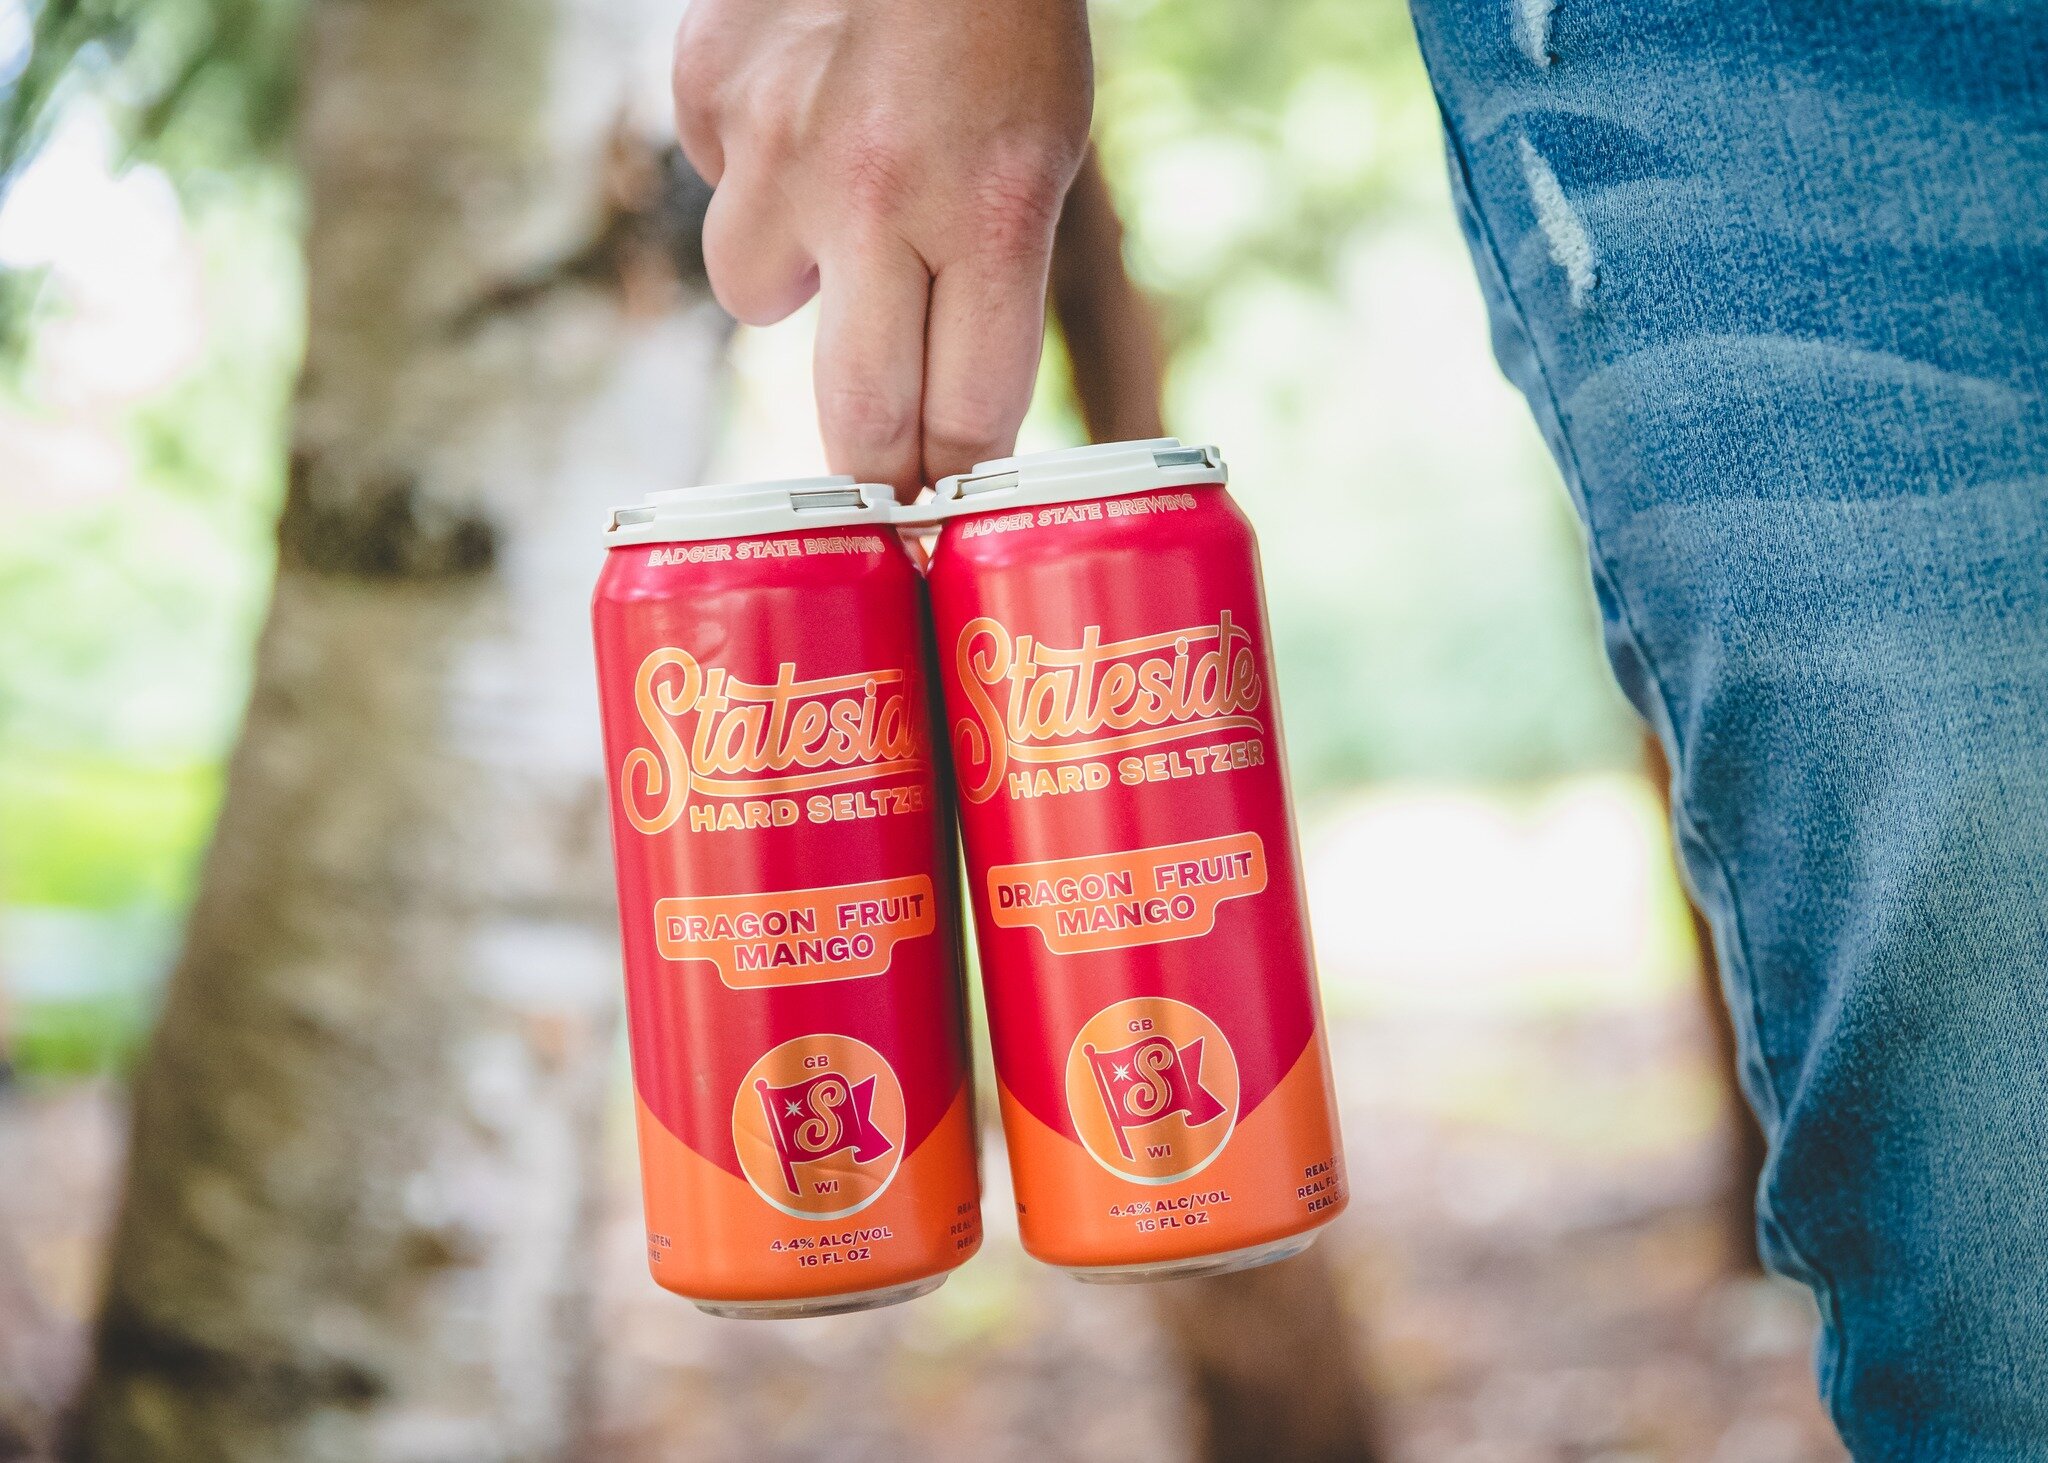 Getting stocked up for the weekend of football and beautiful weather? Make sure you've got your healthy portions of fruit intake for tailgating or watching at home with Stateside Seltzer!